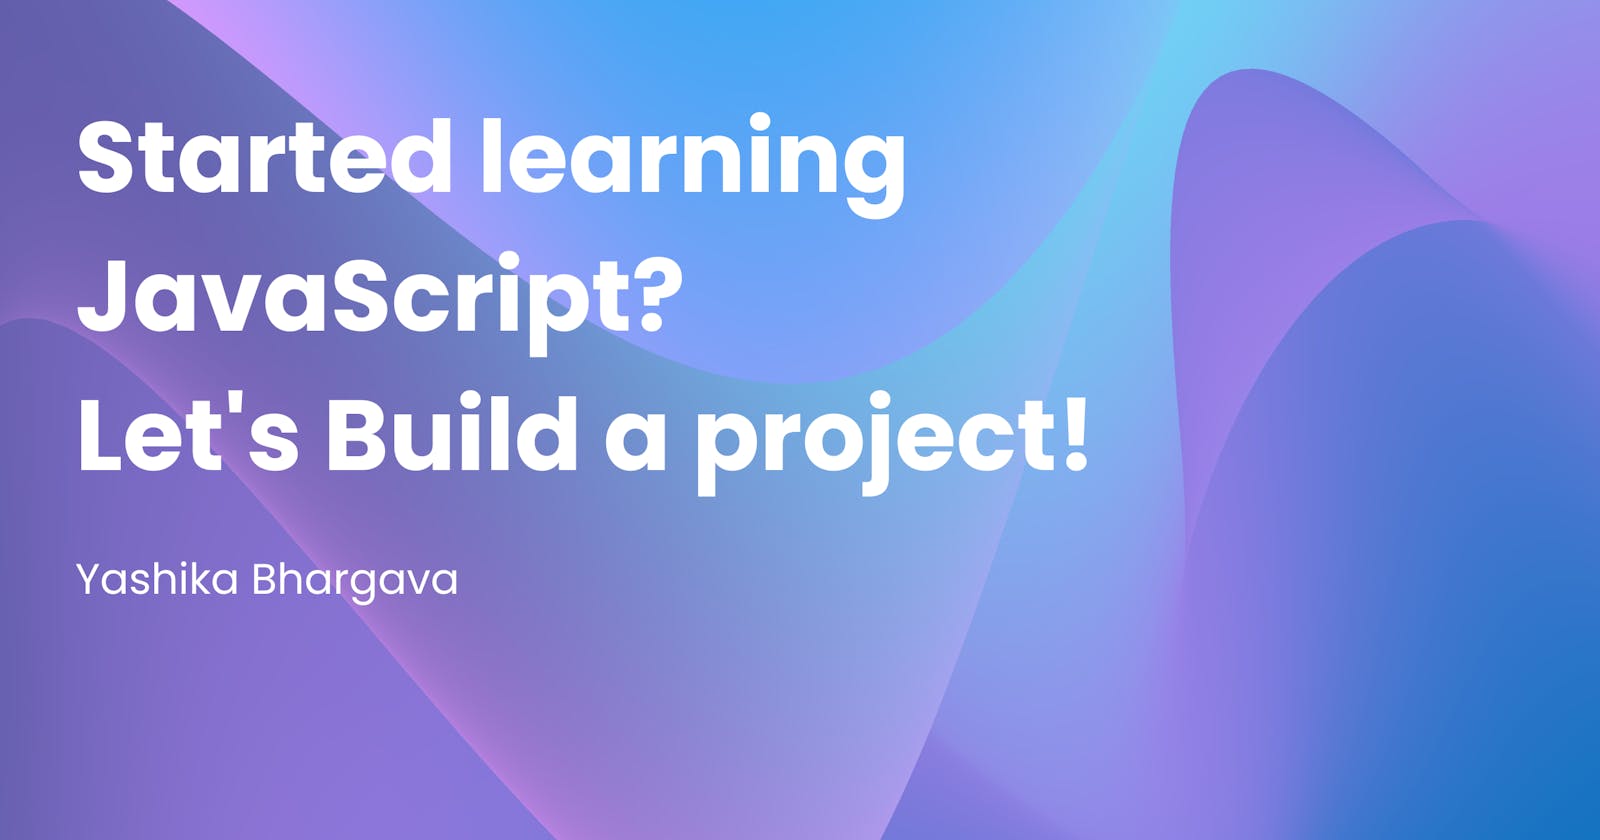 Started learning JavaScript? Let's build a project!